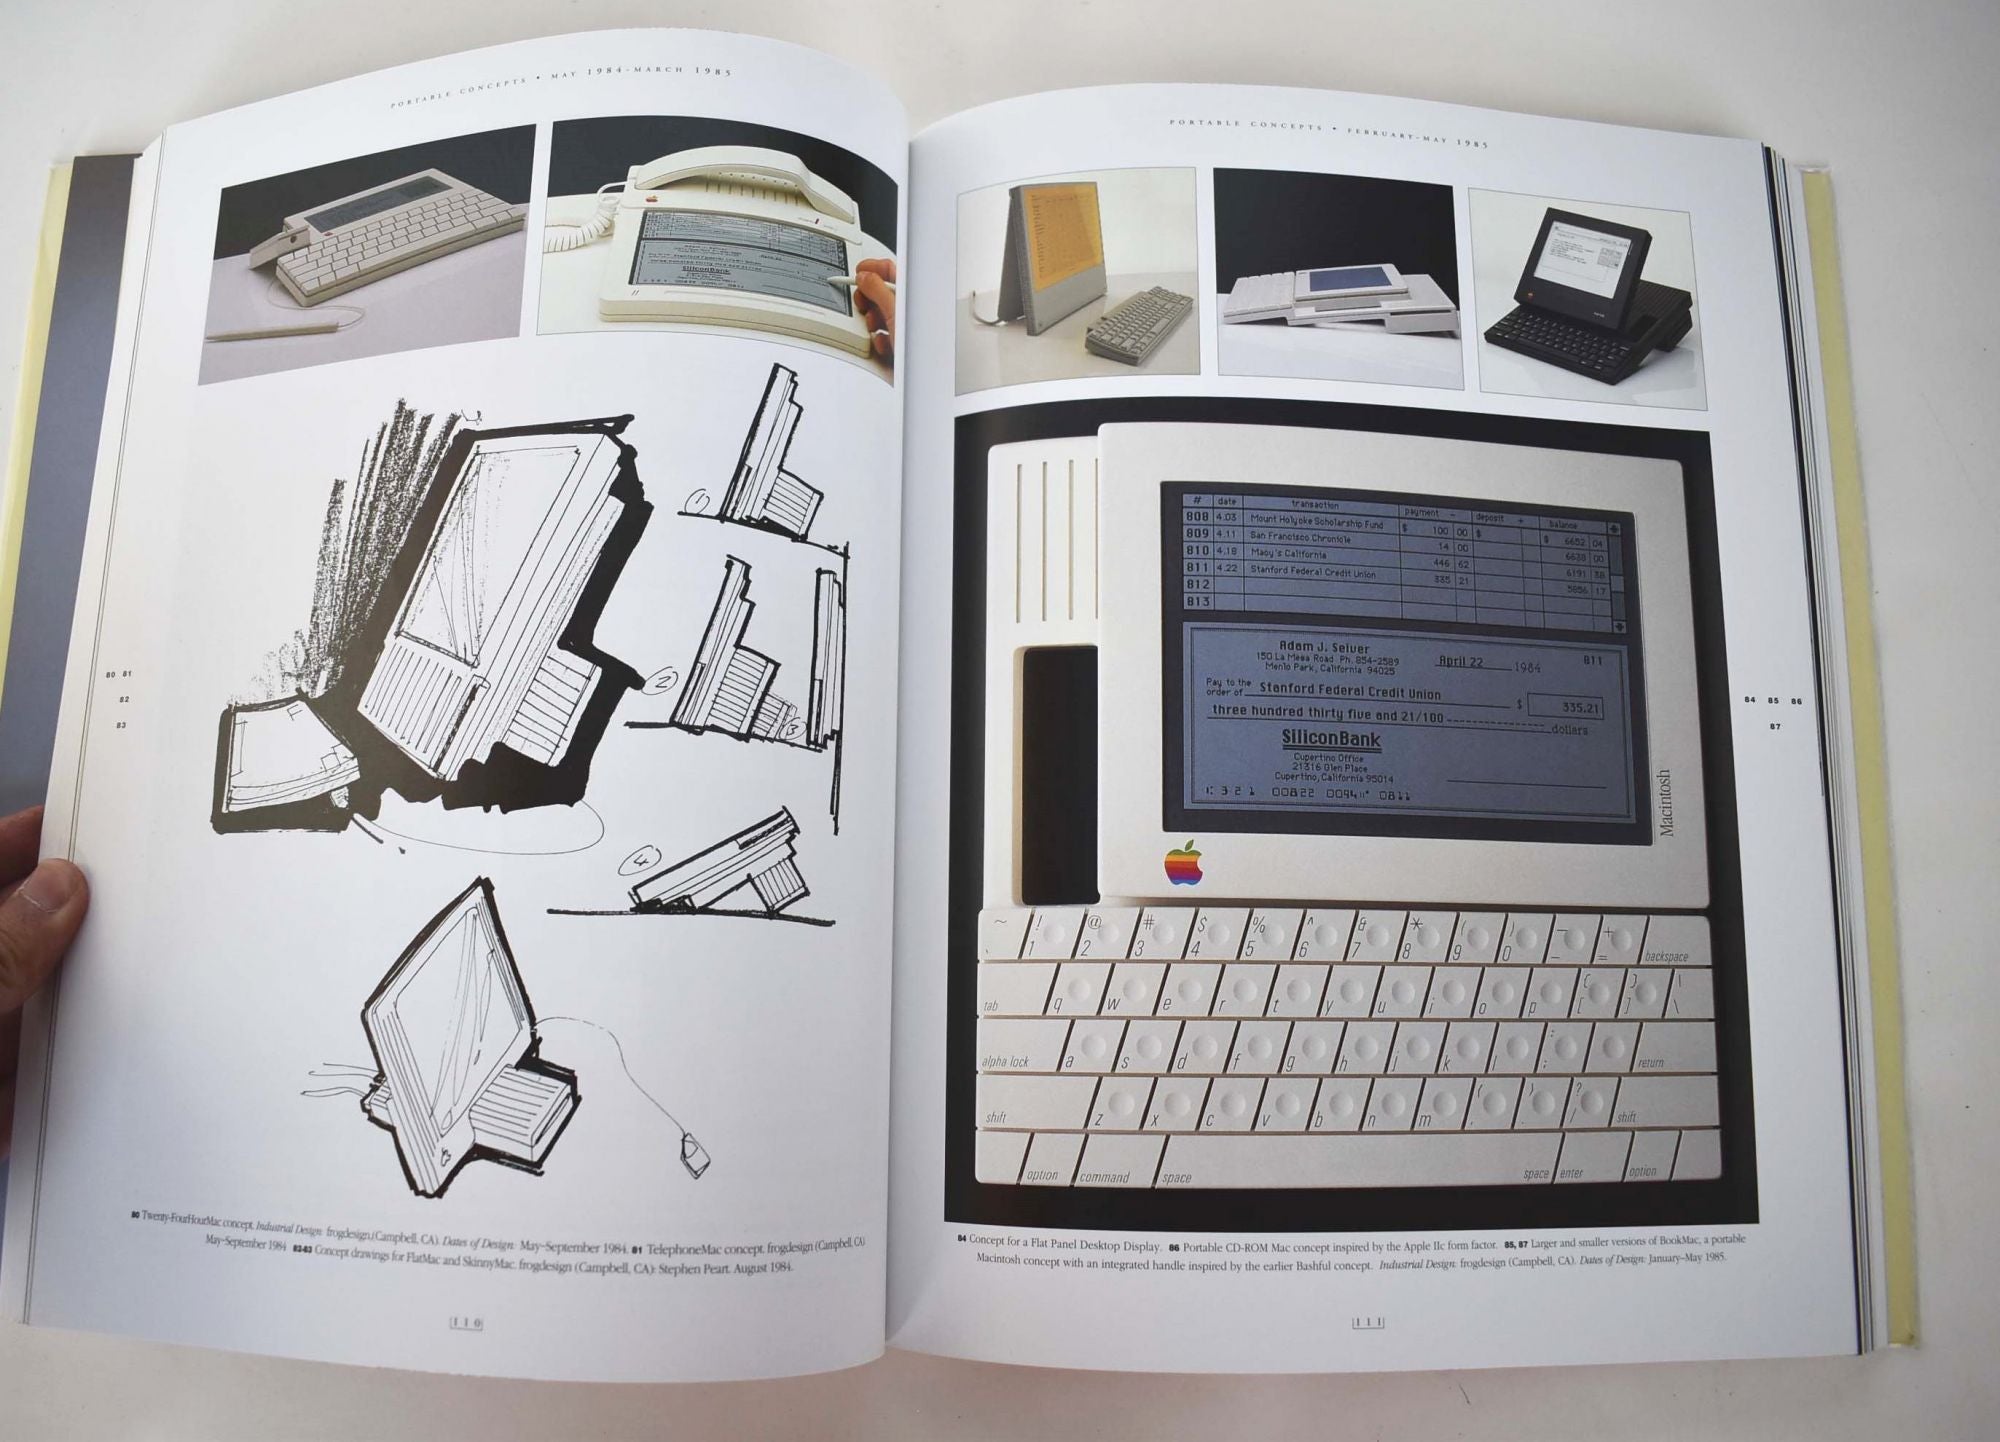 AppleDesign: The Work of the Apple Industrial Design Group | Paul 